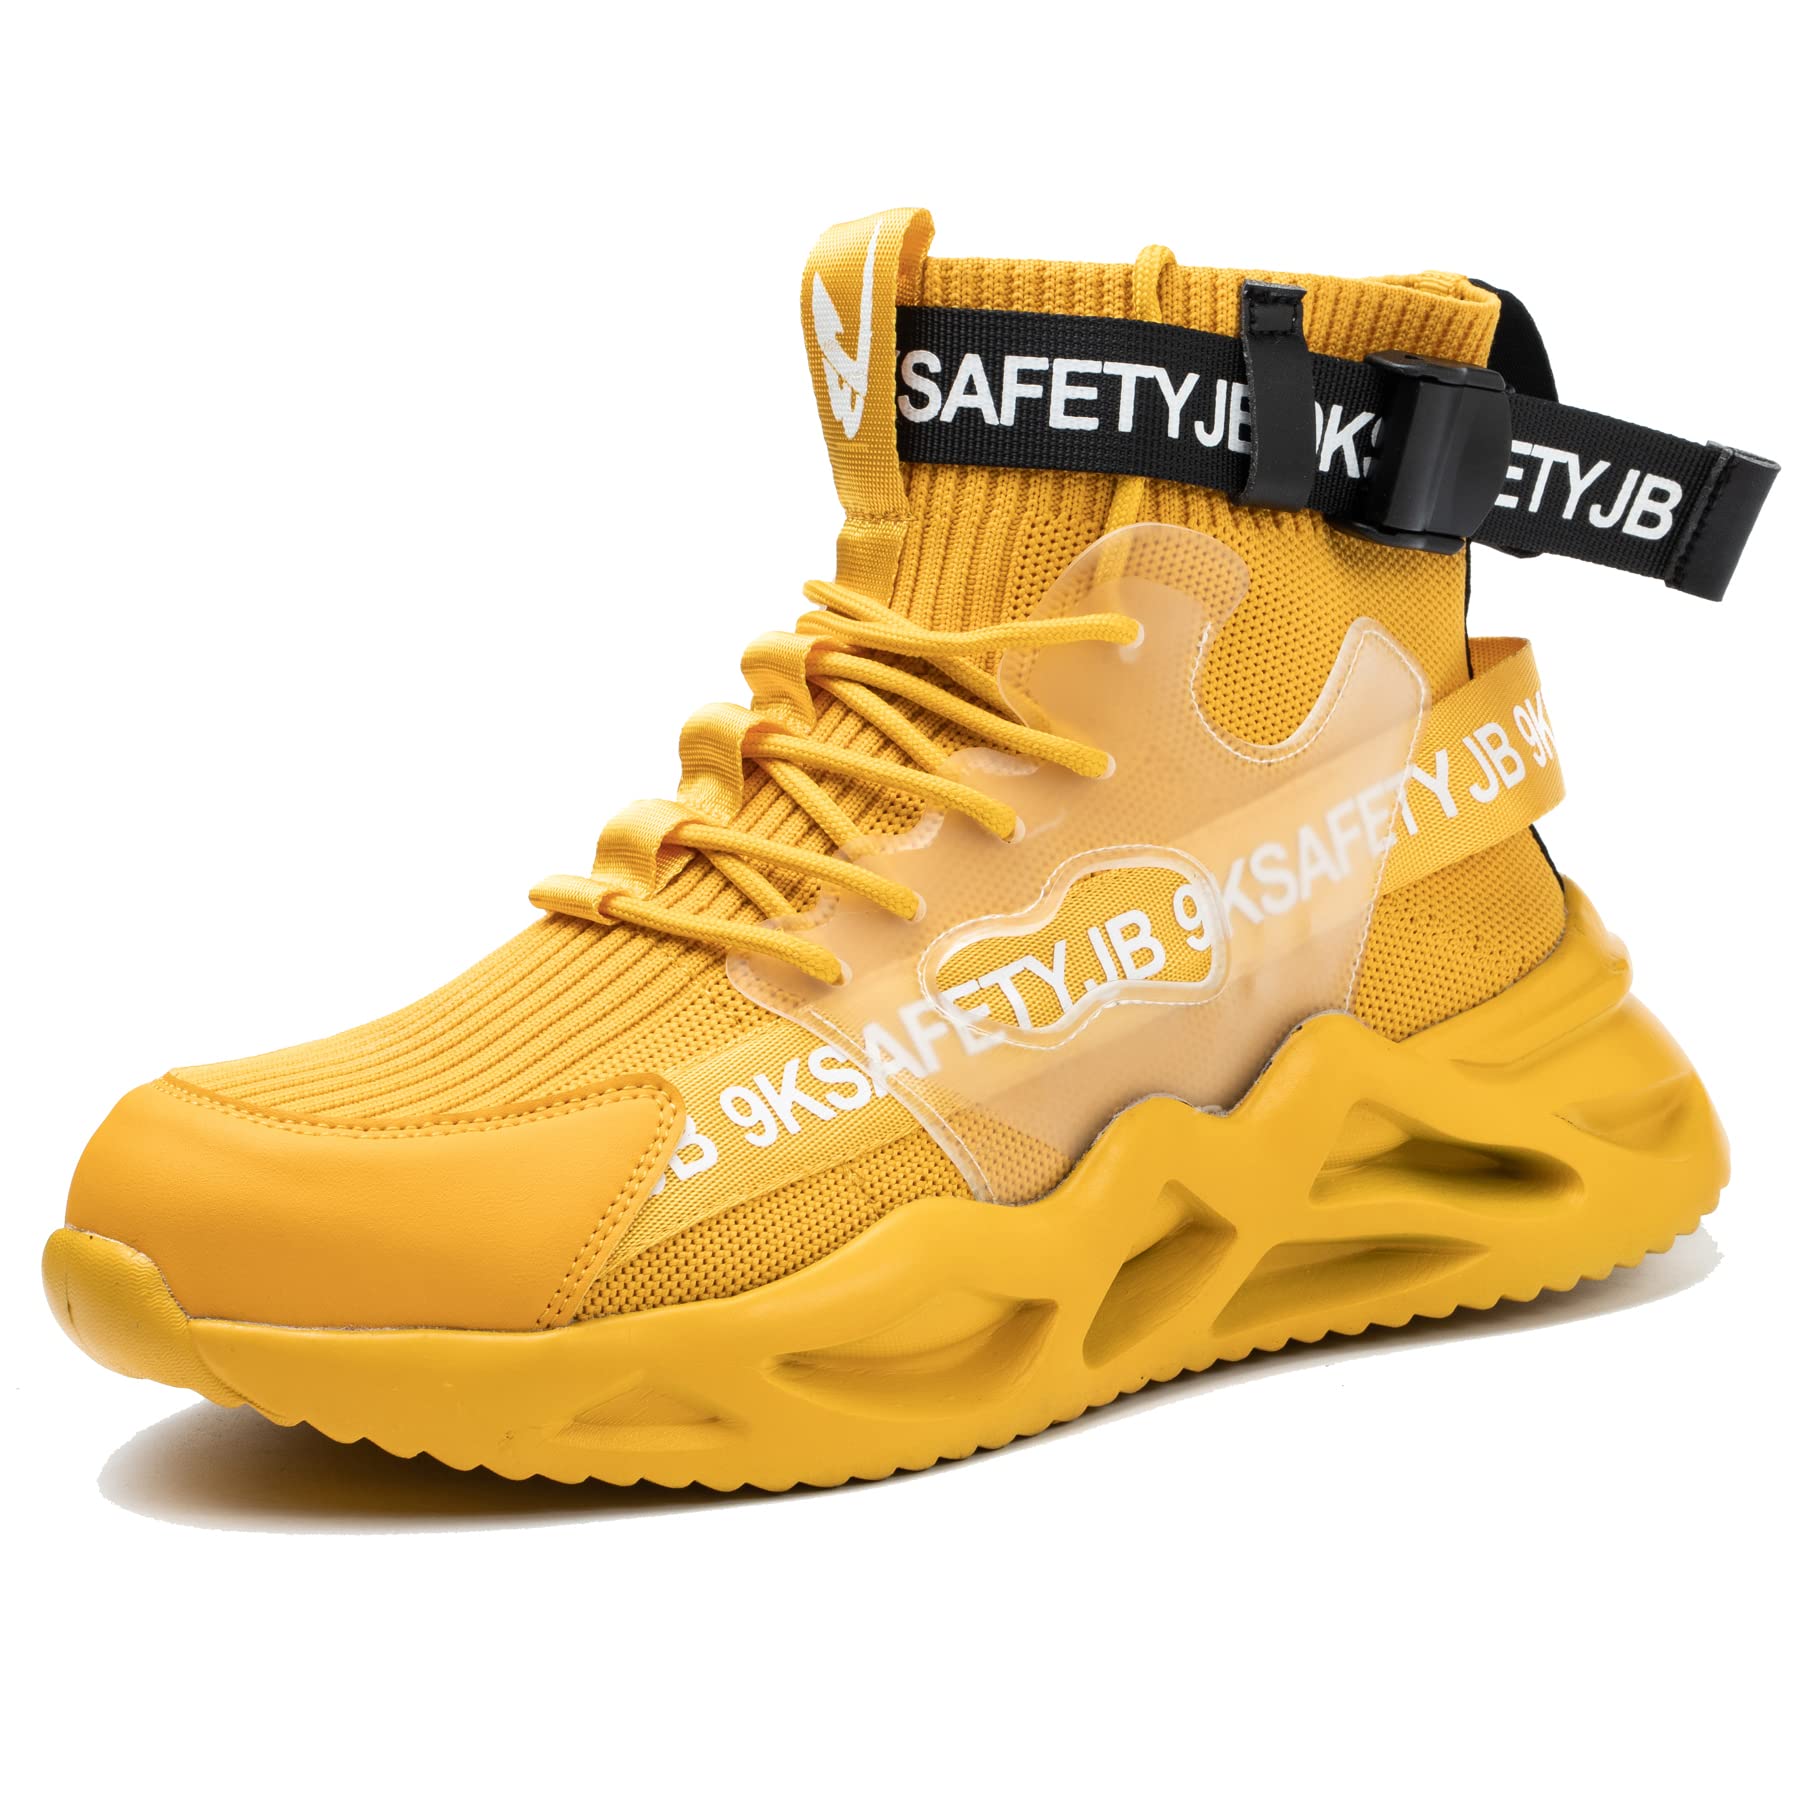 Nutropa Steel Toe Shoes for Men Women Work Safety Footwear Lightweight Breathable Comfortable Industrial Construction Sneakers